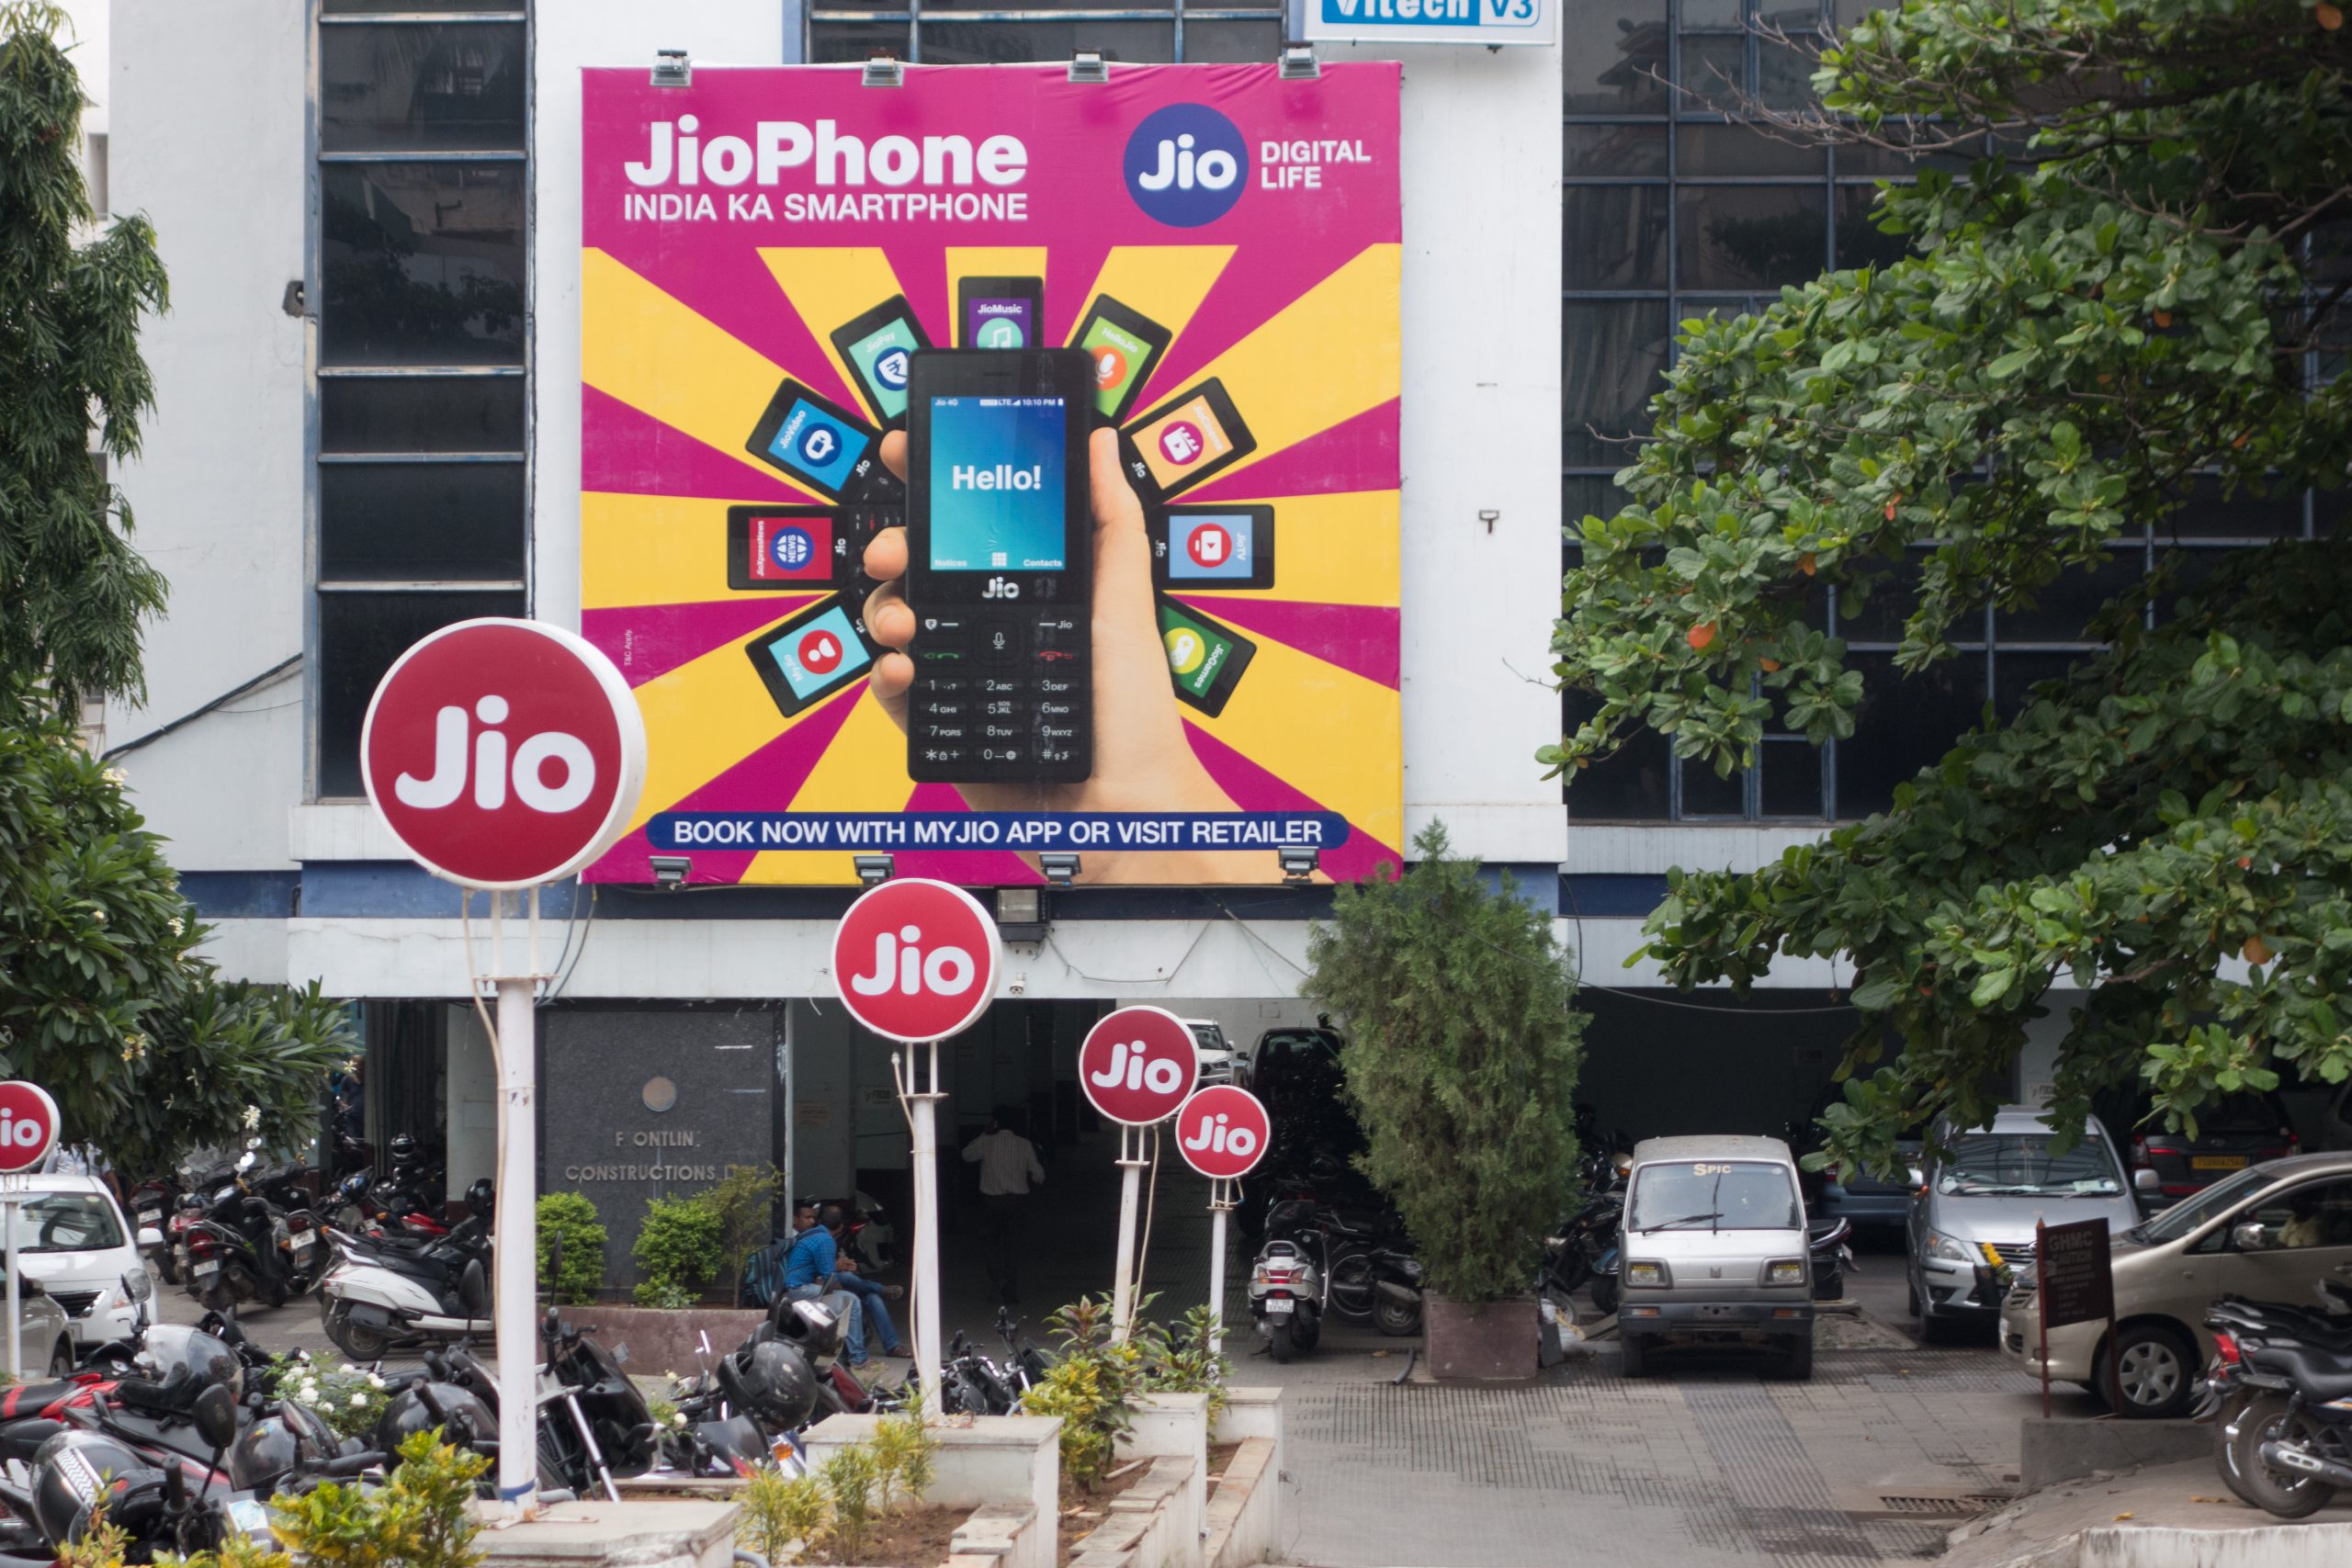 General Atlantic to invest USD 870 million in Reliance’s digital arm, Jio Platforms